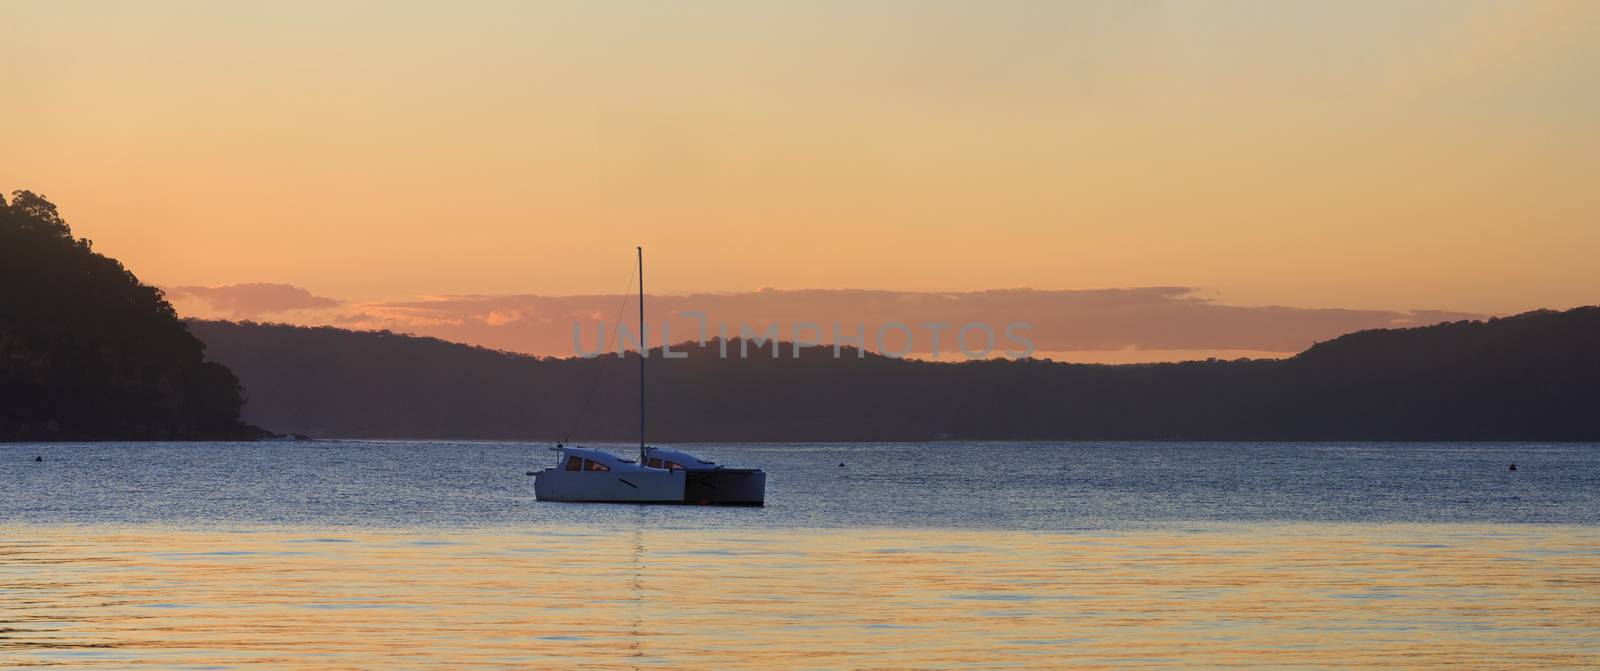 Simple and serenel sunset on the last day of winter at beautiful travel destination Palm Beach, Sydney - a sign of the warm days ahead.  Catamaran on the water and views to West Head  Patonga and Hawkesbury, from Pittwater side.